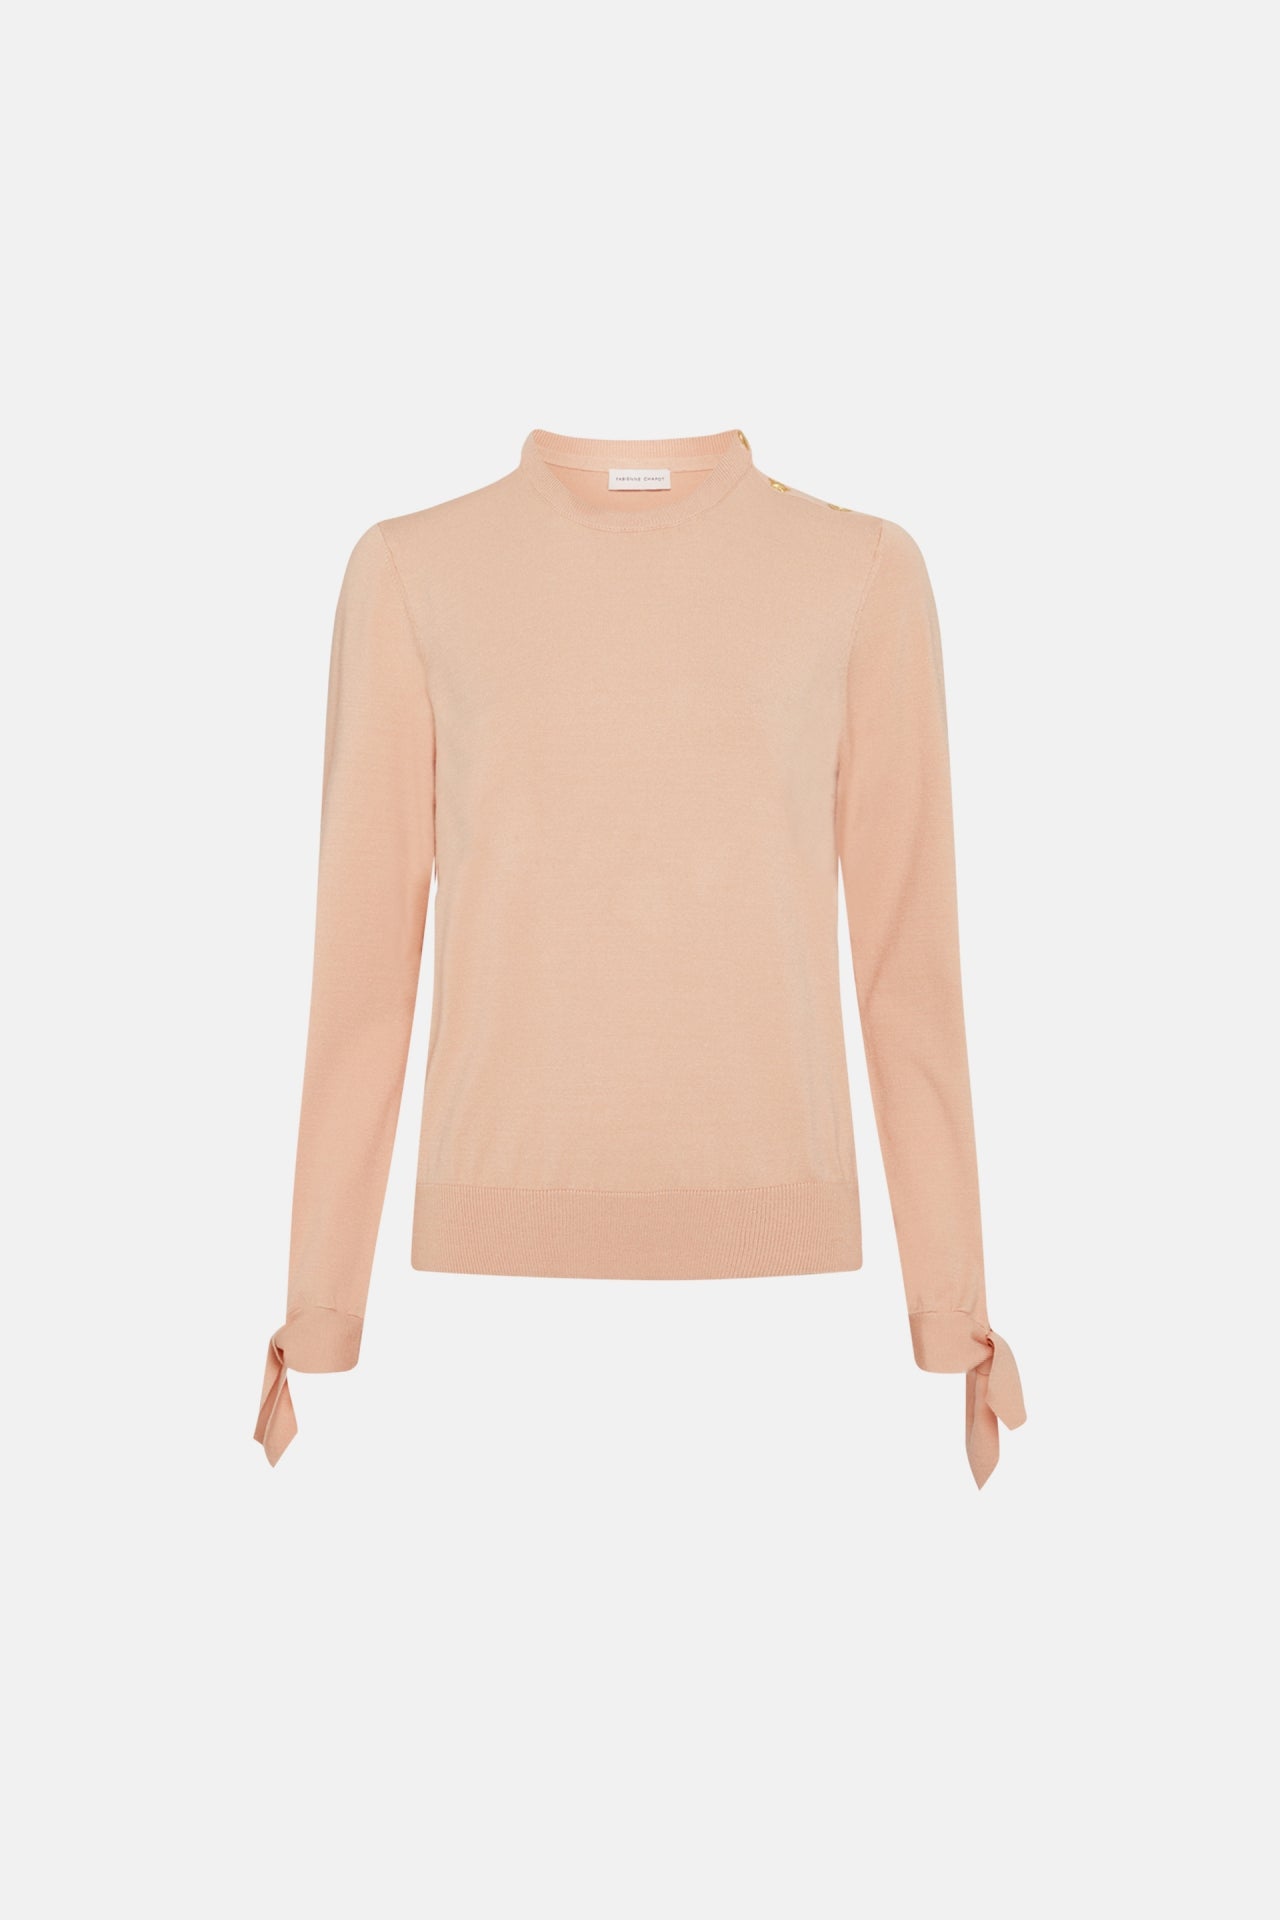 Molly Bow Pullover | Pink Sand